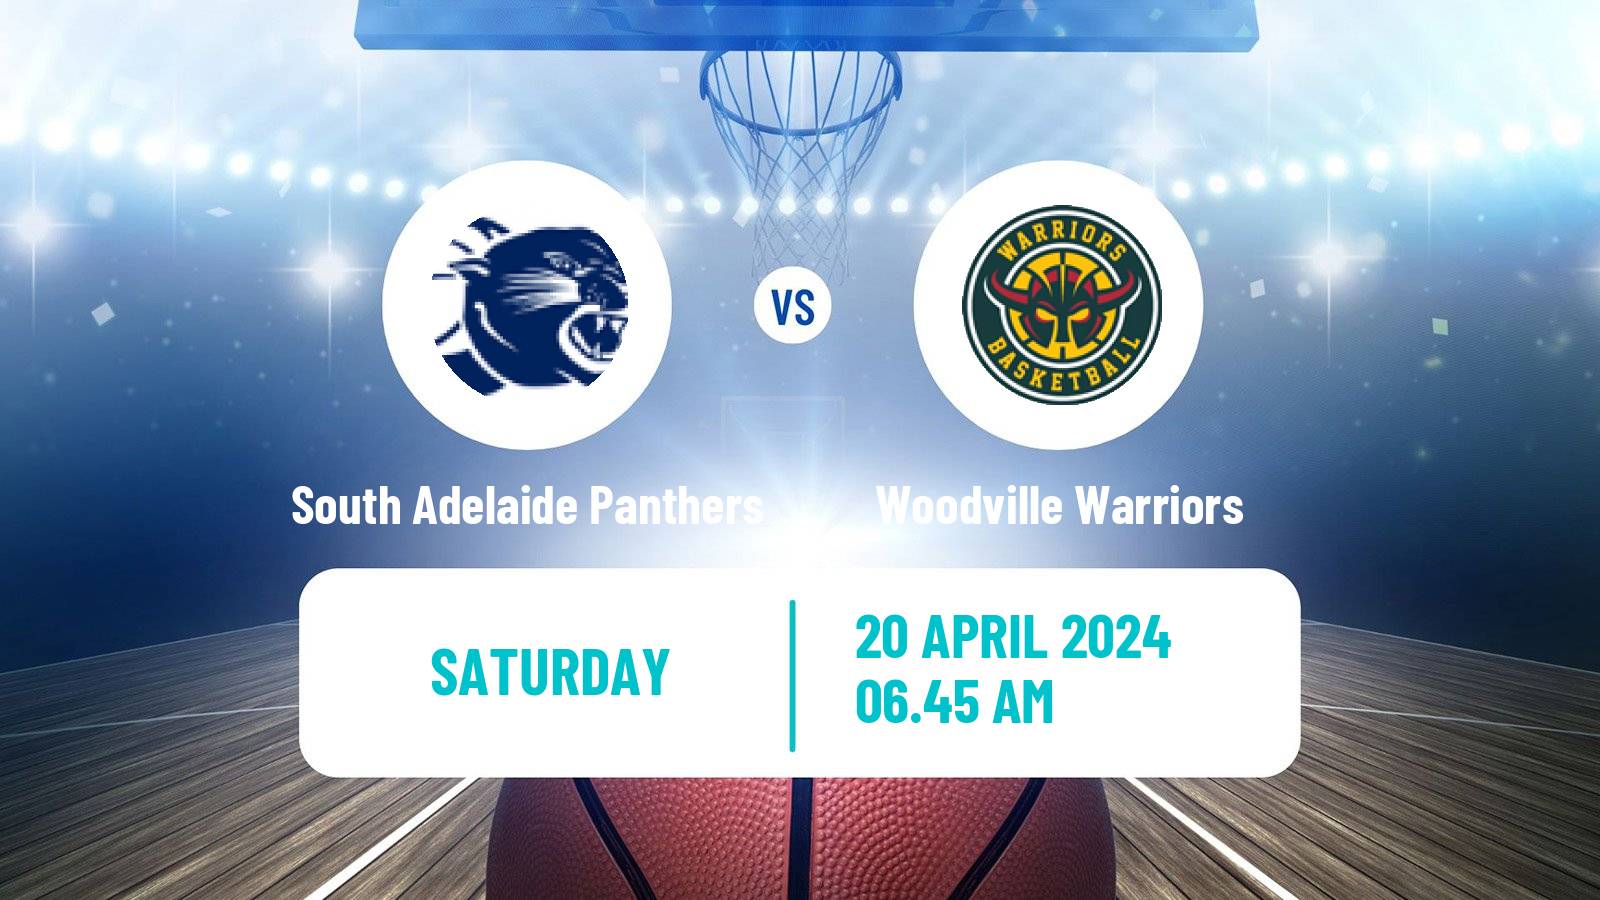 Basketball Australian NBL1 Central South Adelaide Panthers - Woodville Warriors